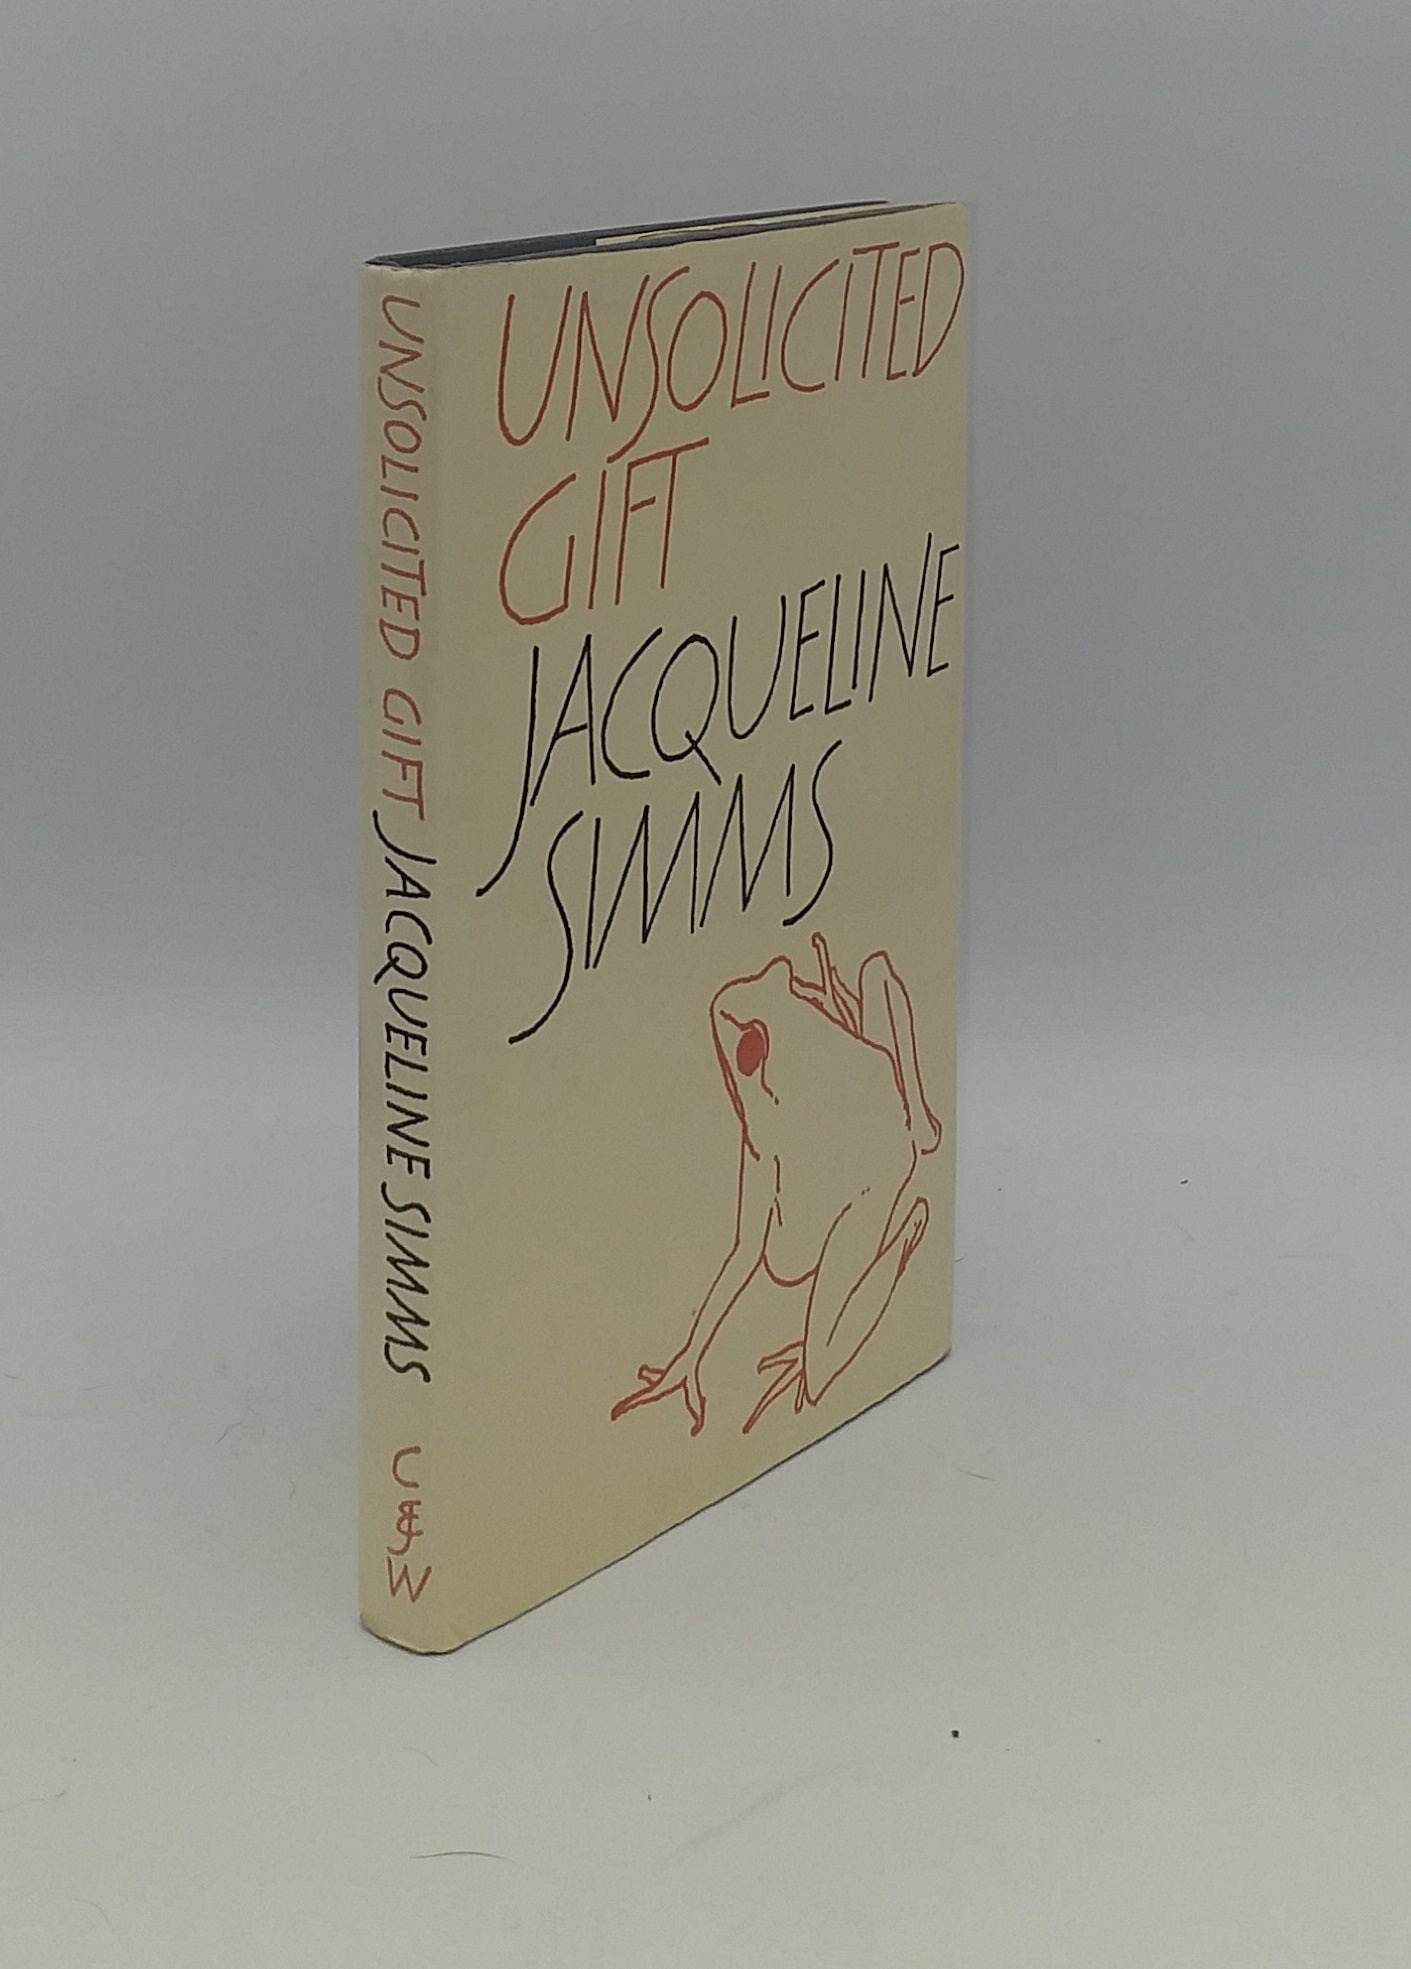 SIMMS Jacqueline - Unsolicited Gift